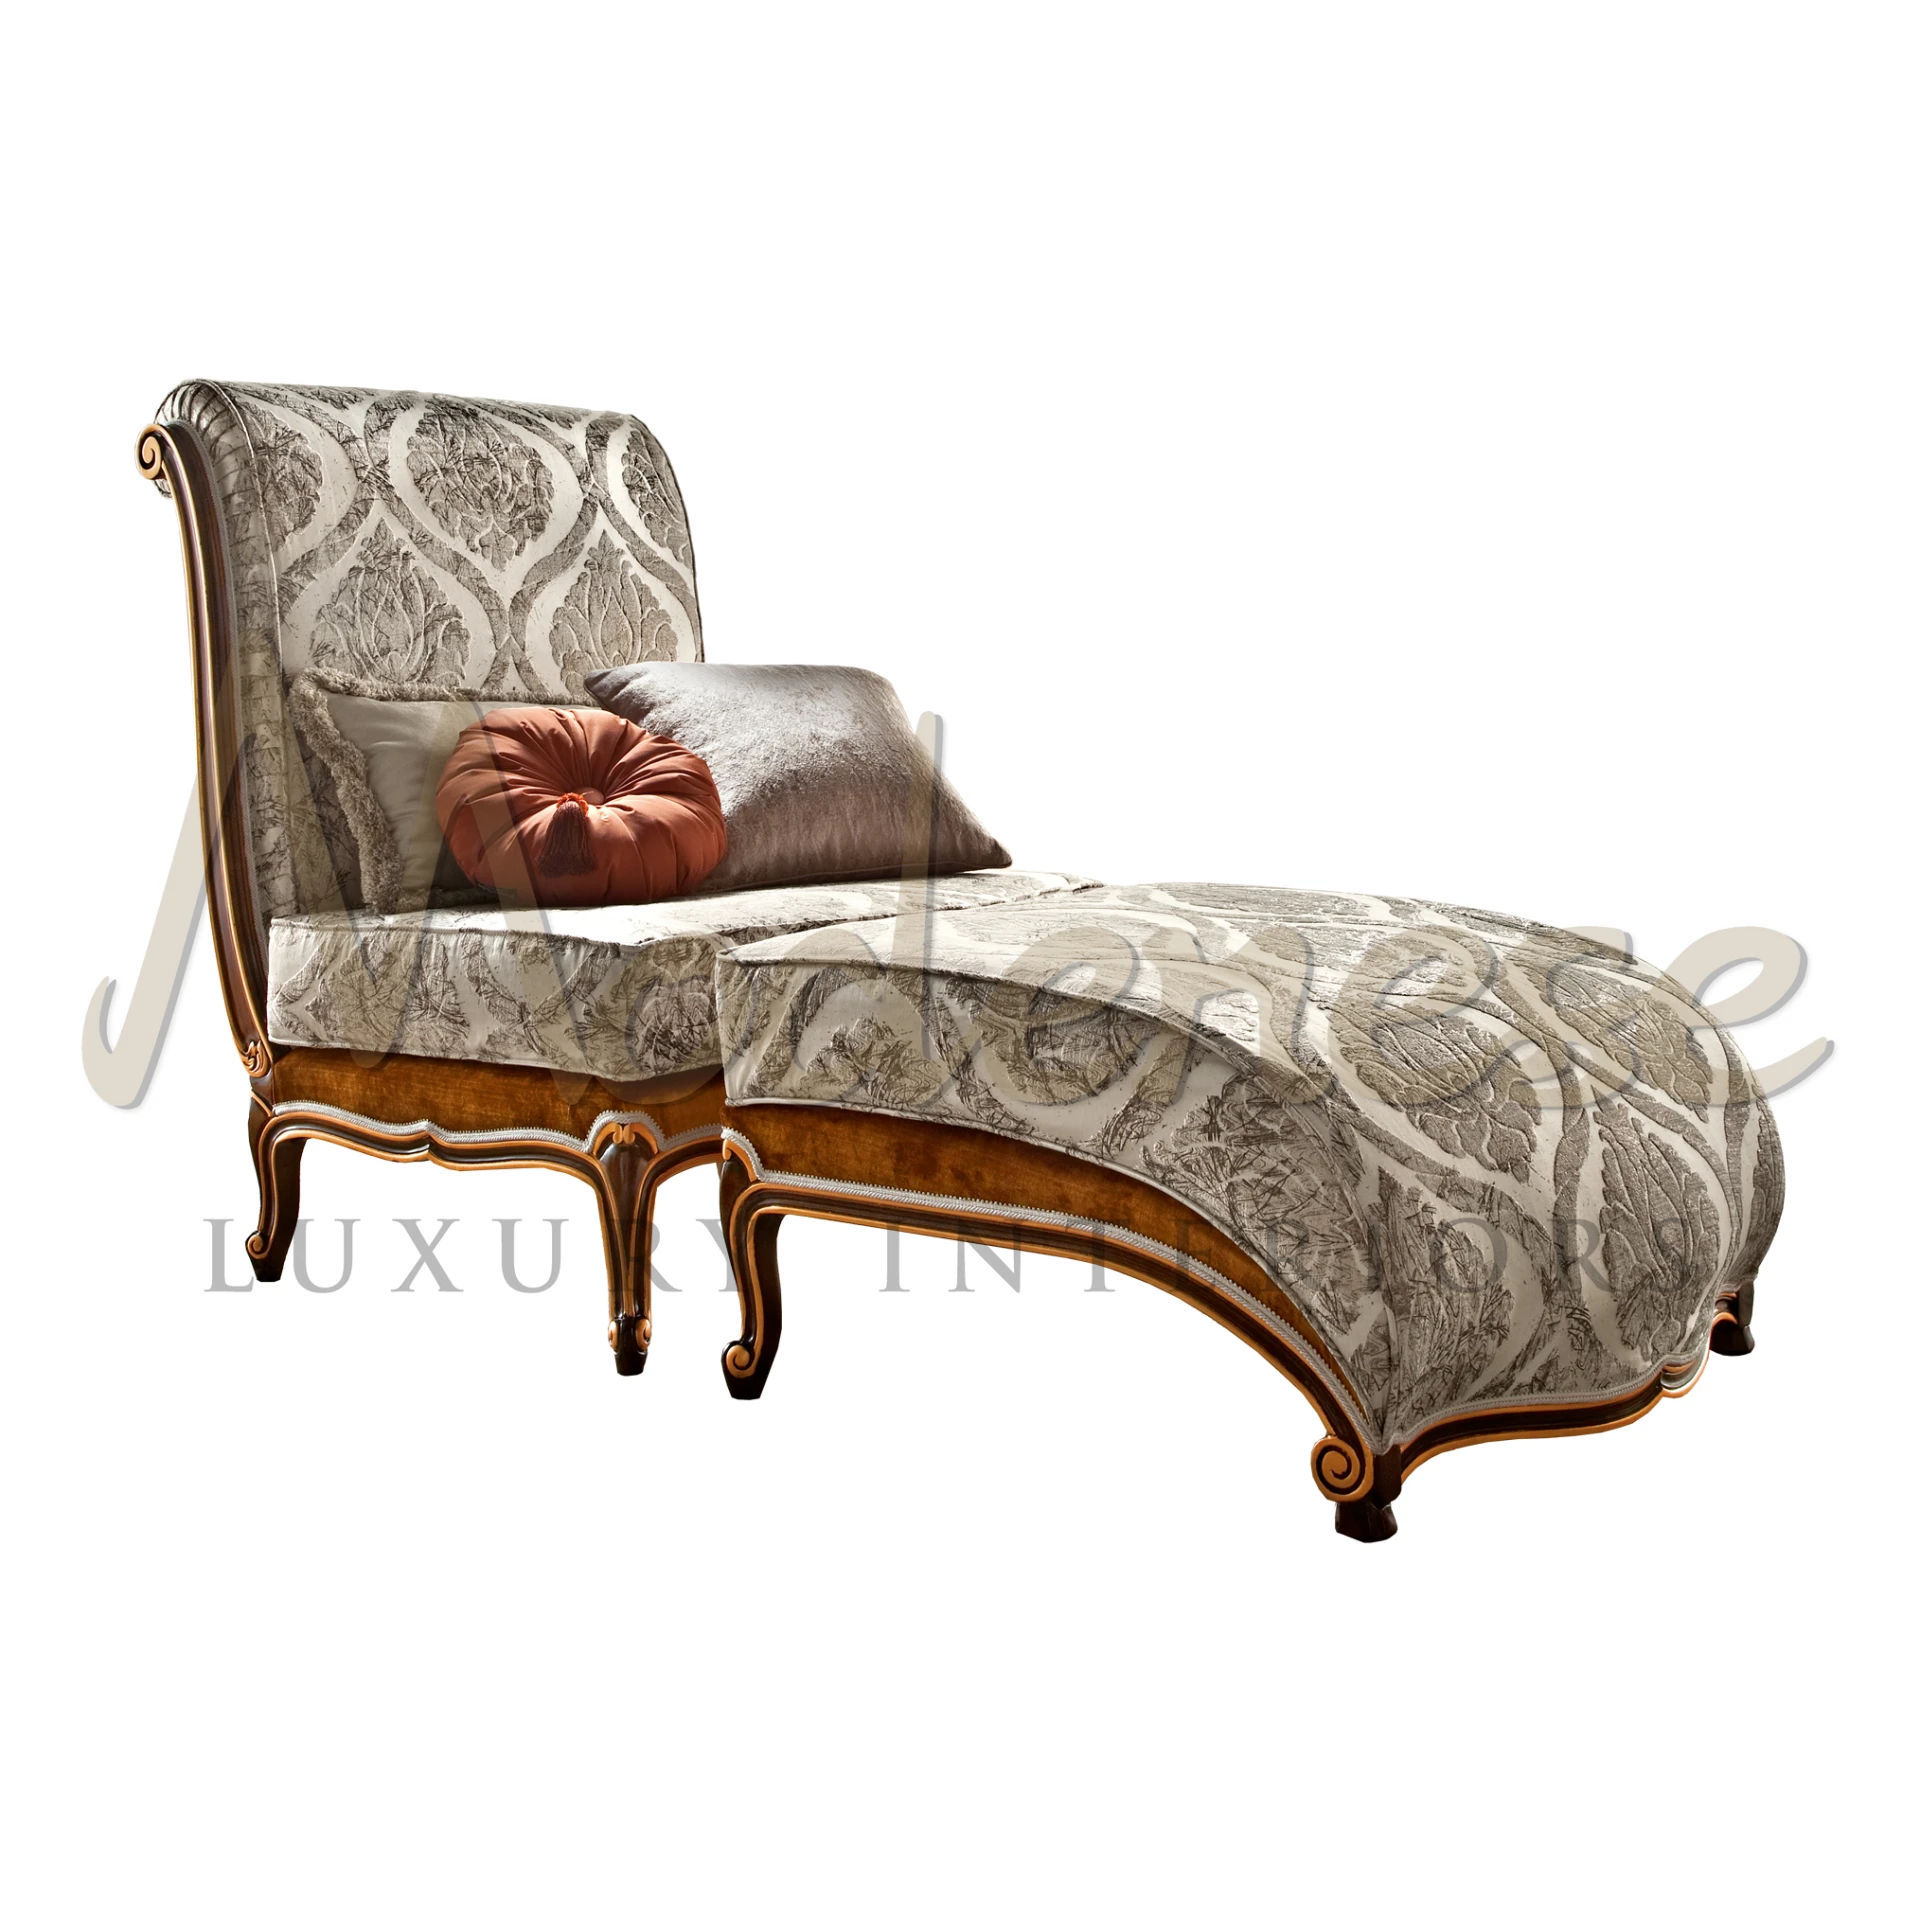 Luxurious damask-patterned chaise lounge with ornate wooden legs and plush pillows.                                                                           